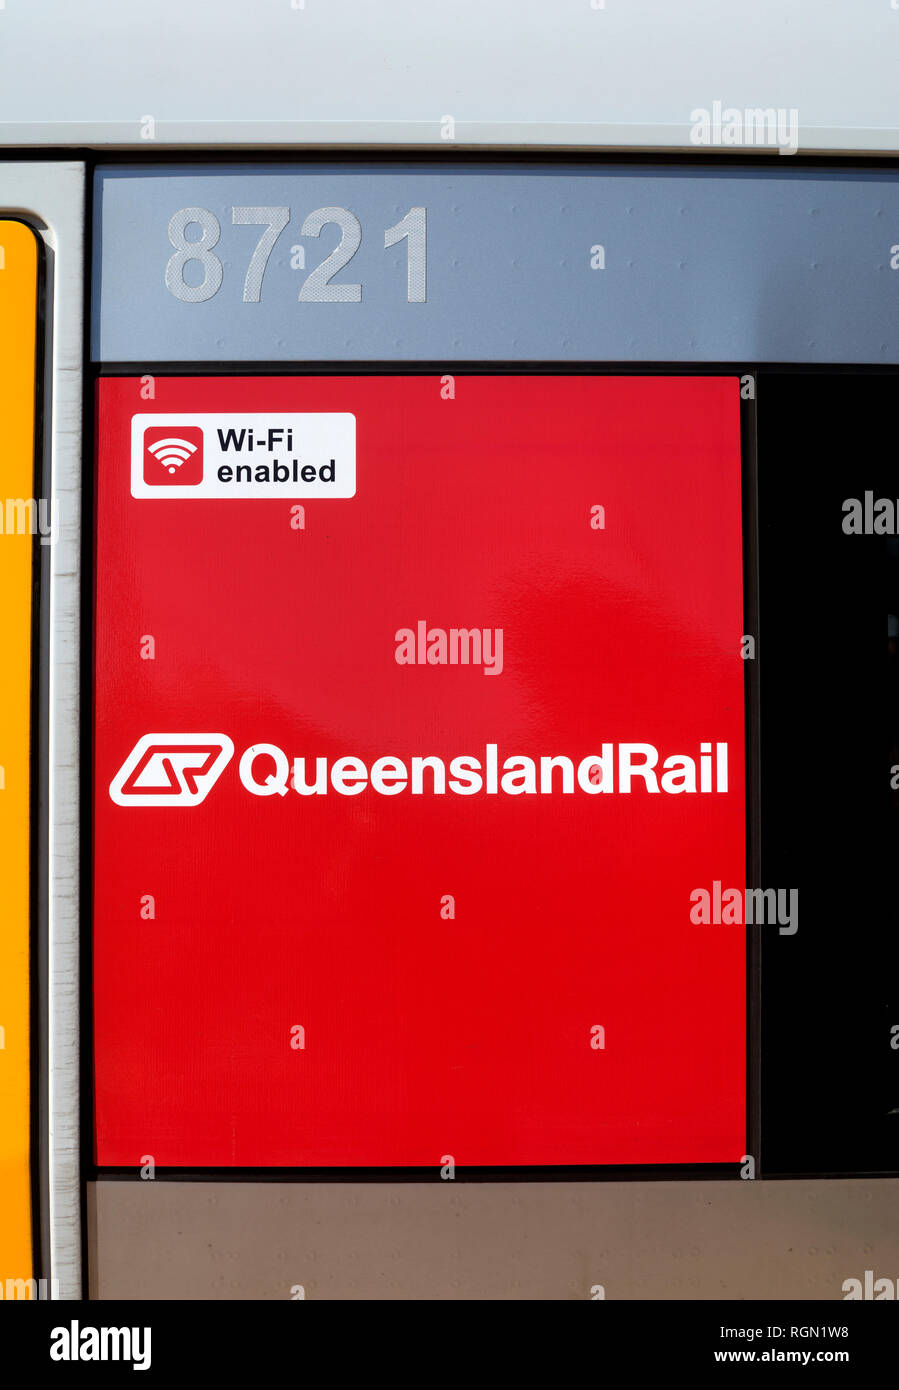 Wi-fi enabled sign on a Queensland Rail train, Australia Stock Photo